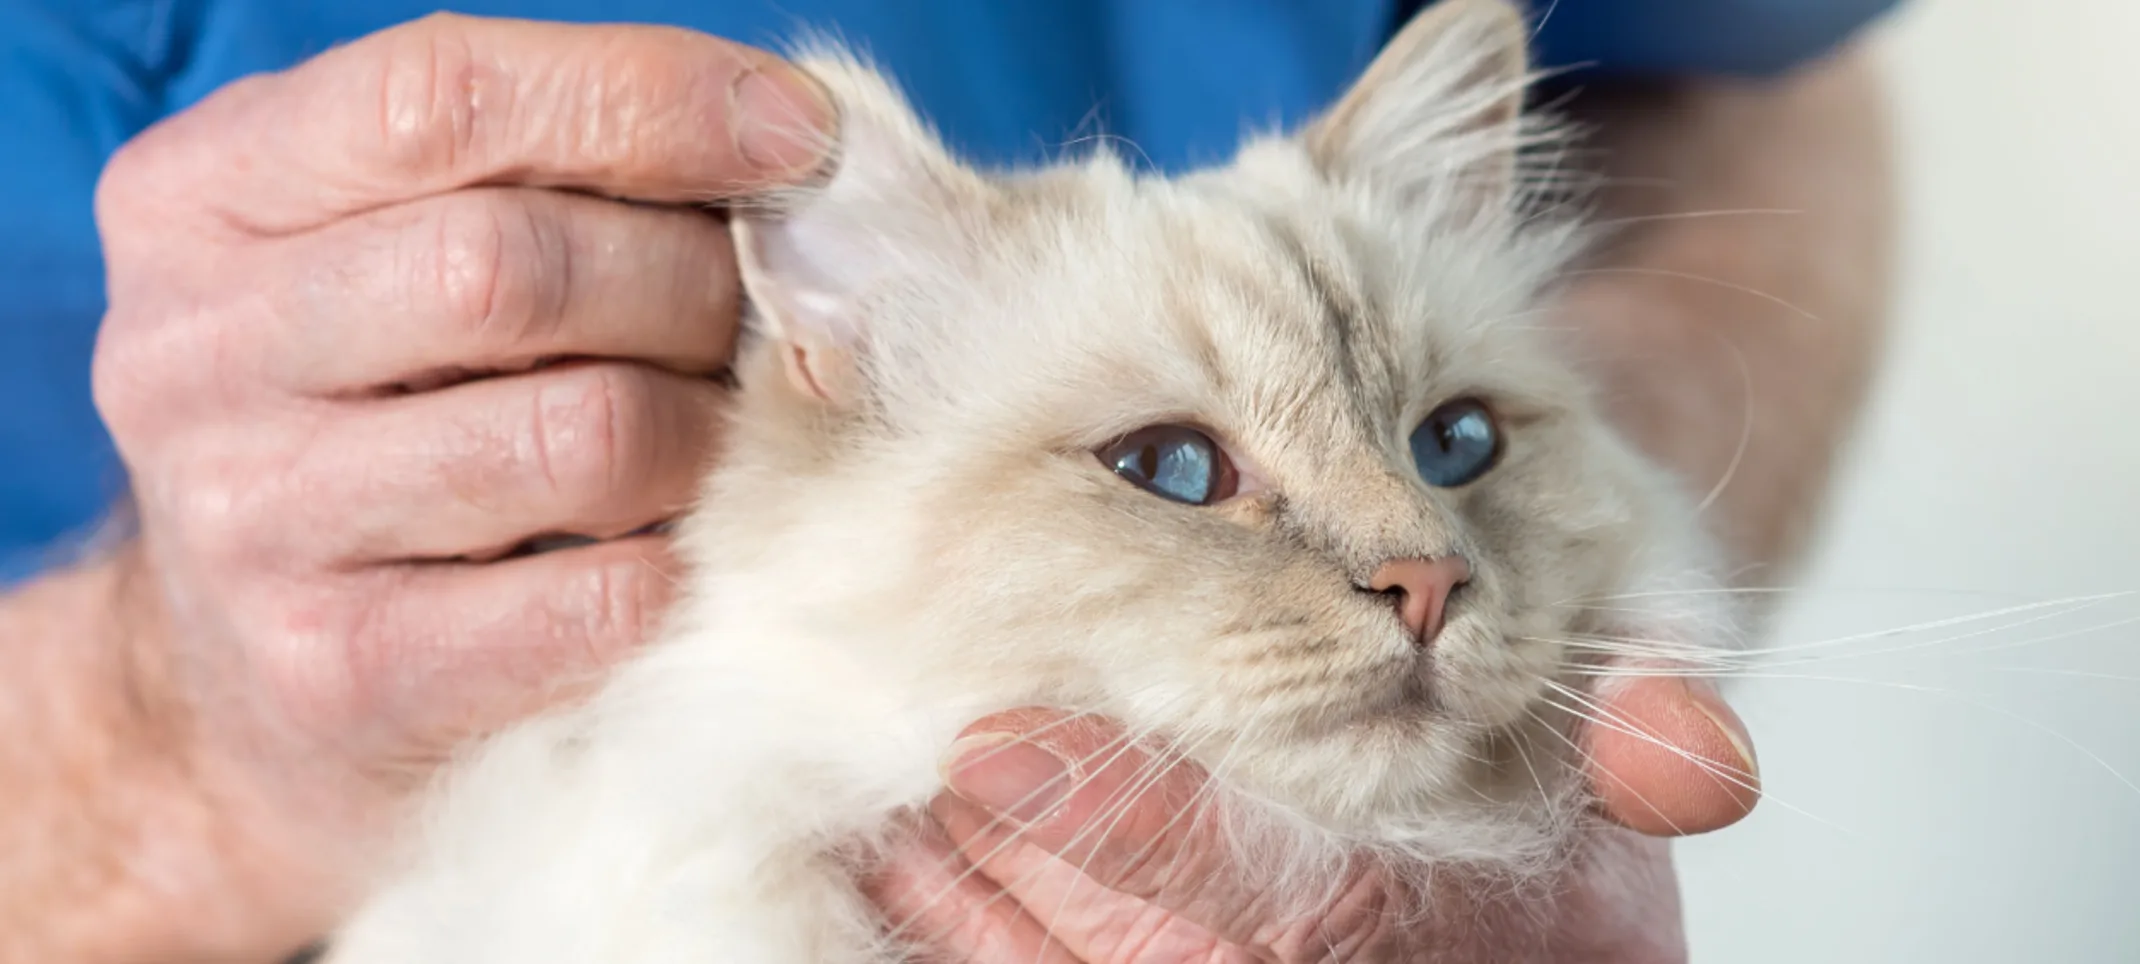 Close Up of Staff Holding Cat's Face for a Check Up